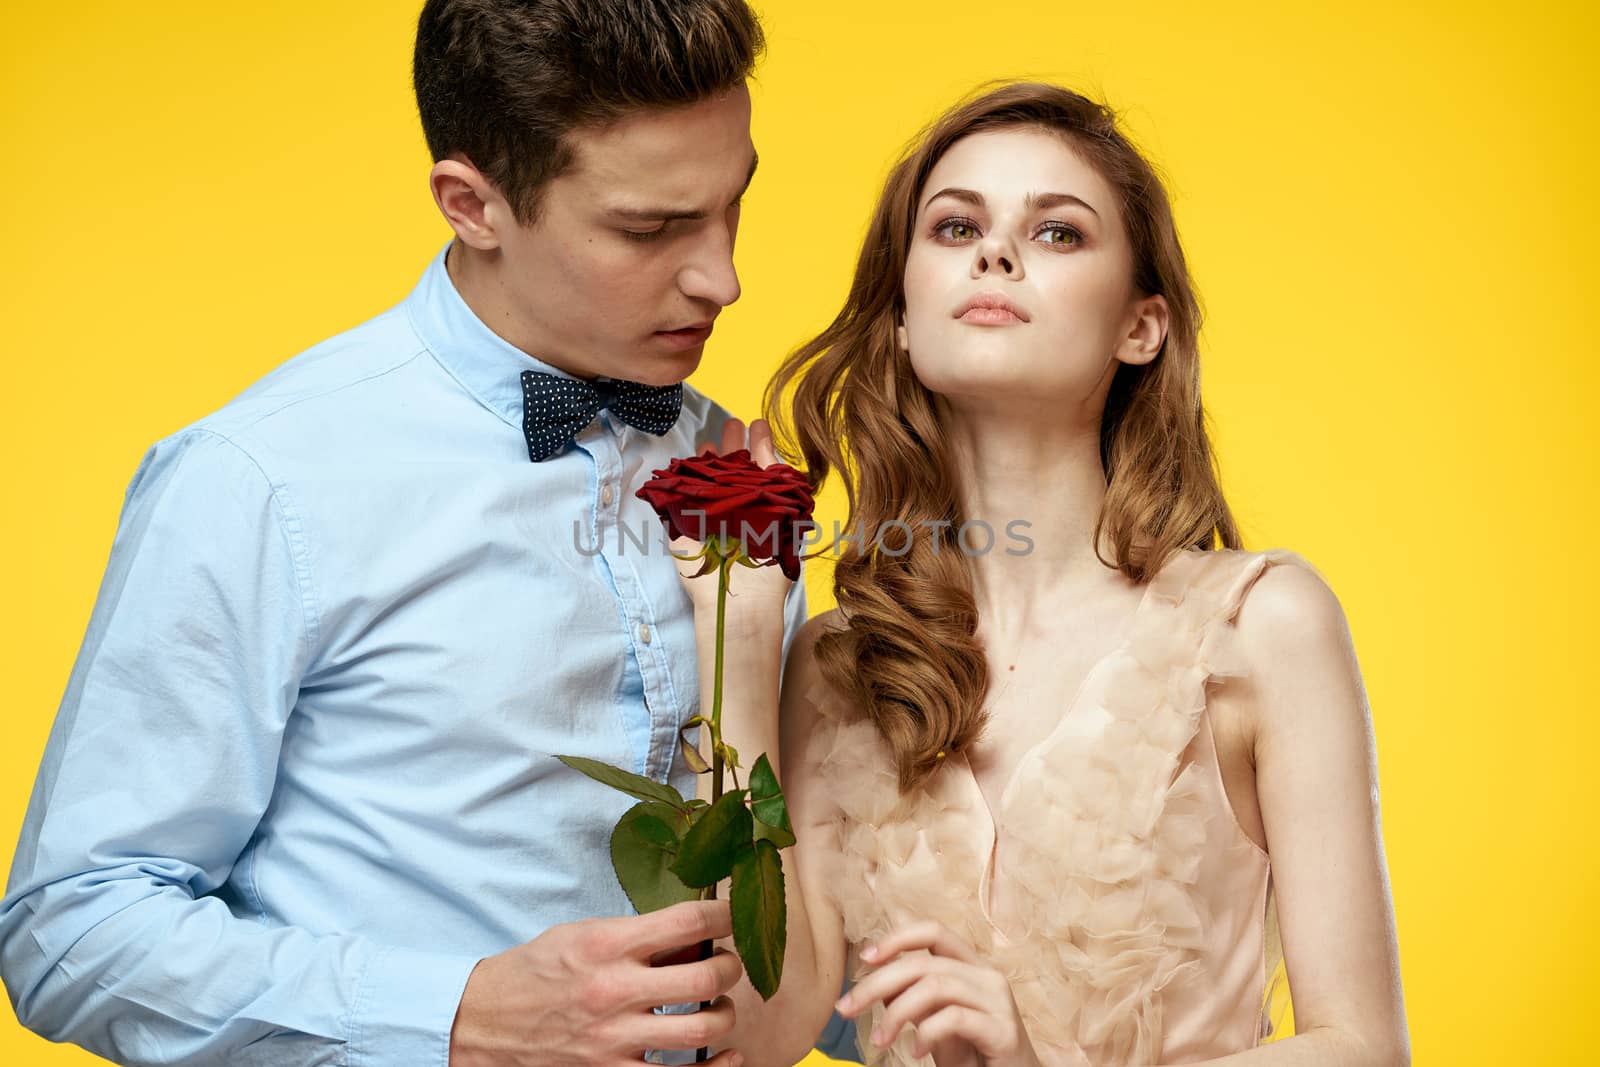 Enamored man and woman with red rose on yellow background cropped view close-up romance by SHOTPRIME